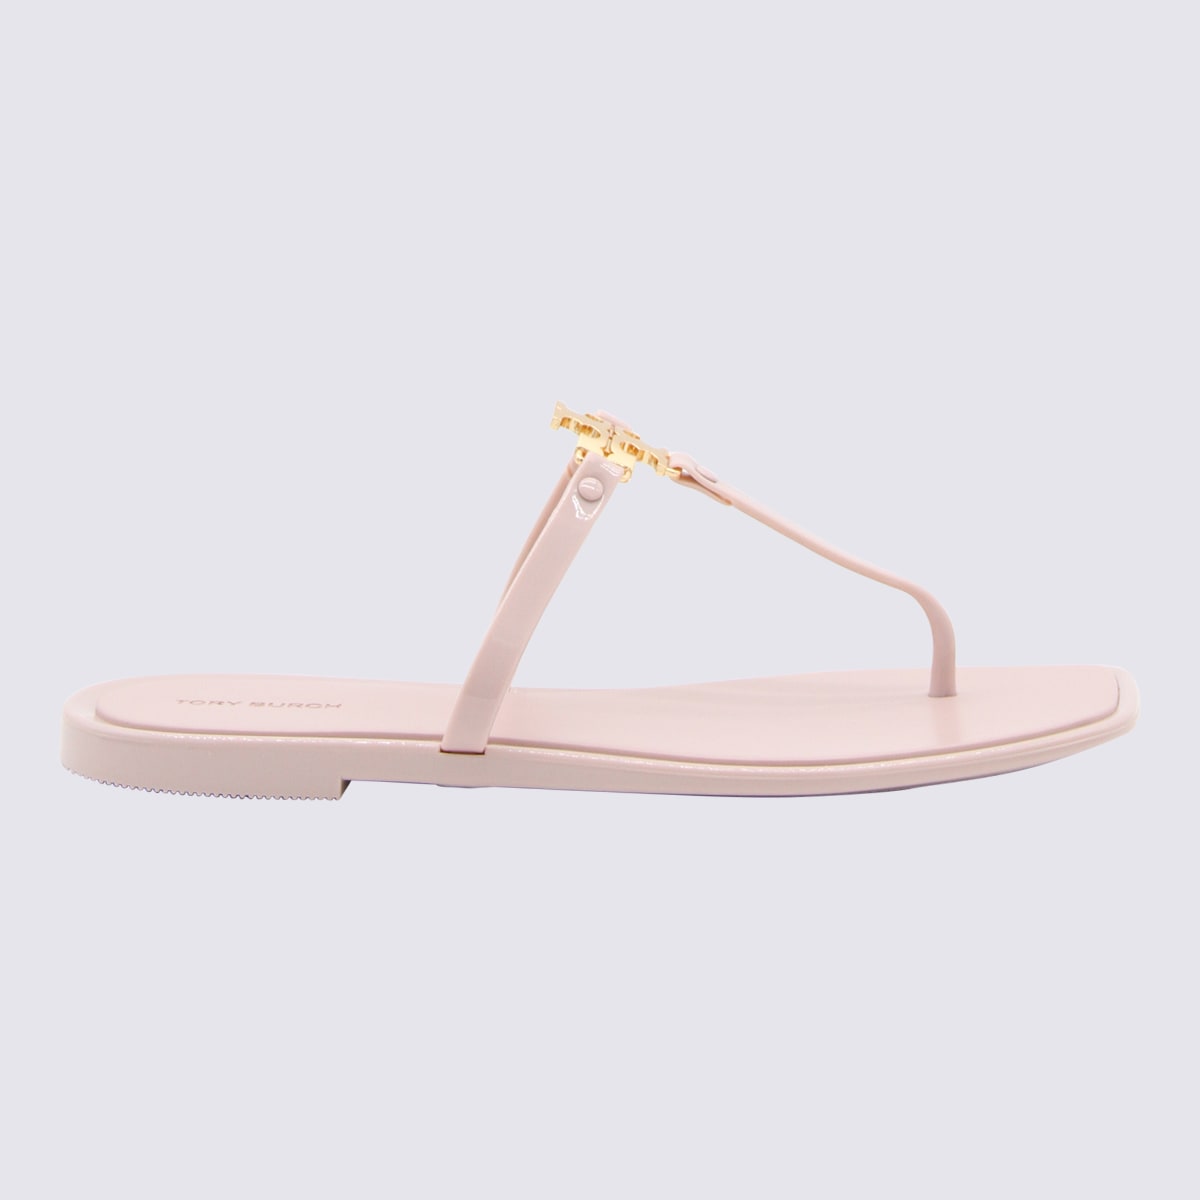 TORY BURCH MEADOW SWEET AND GOLD RUBBER ROXANNE JELLY FLATS